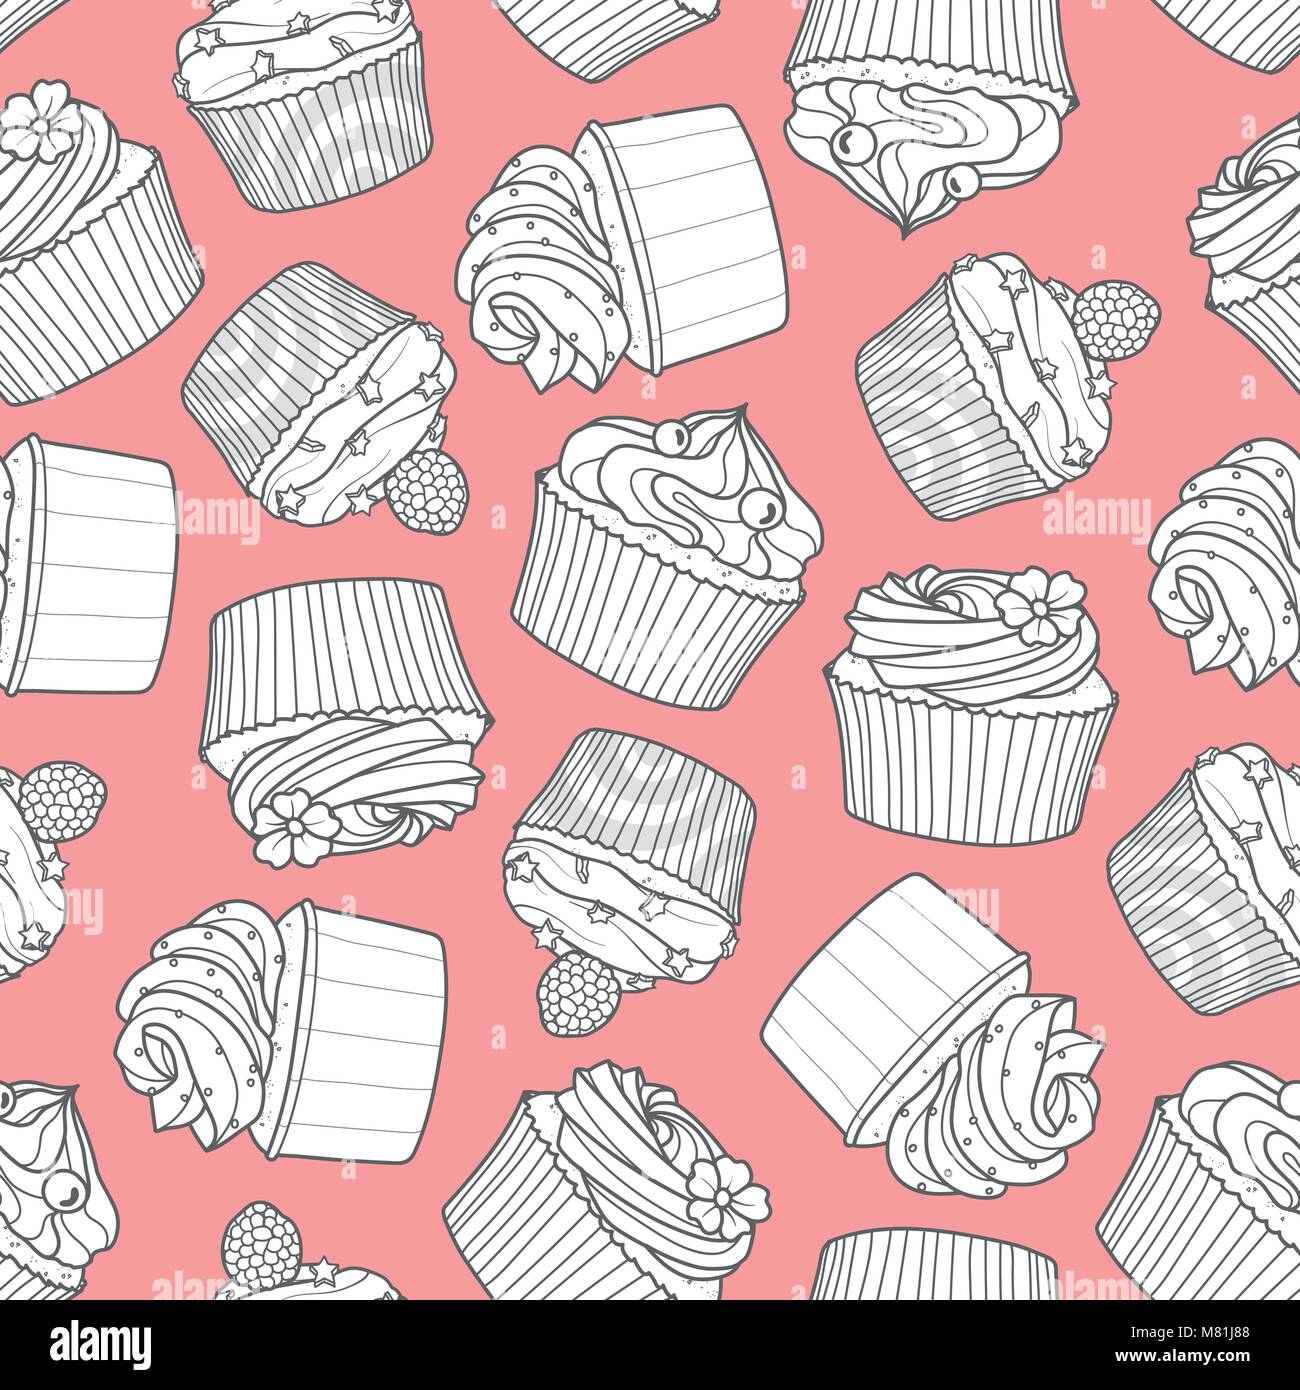 4 styles of cupcake random on pink background. Cute hand drawn seamless pattern of dessert in gray outline and white plane. Stock Vector